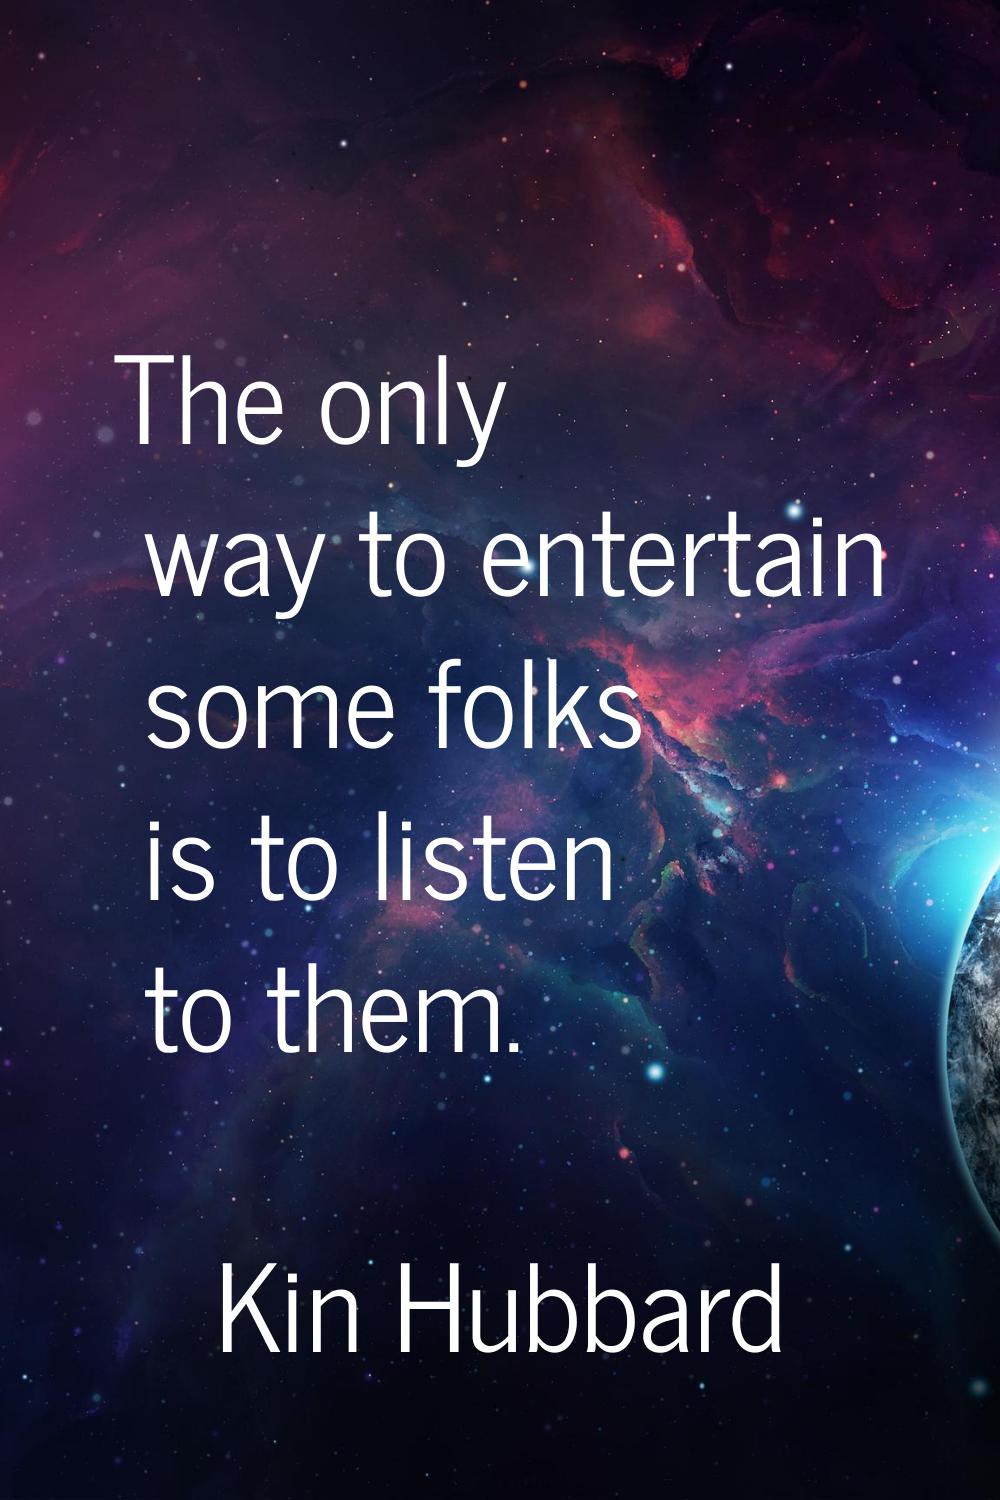 The only way to entertain some folks is to listen to them.